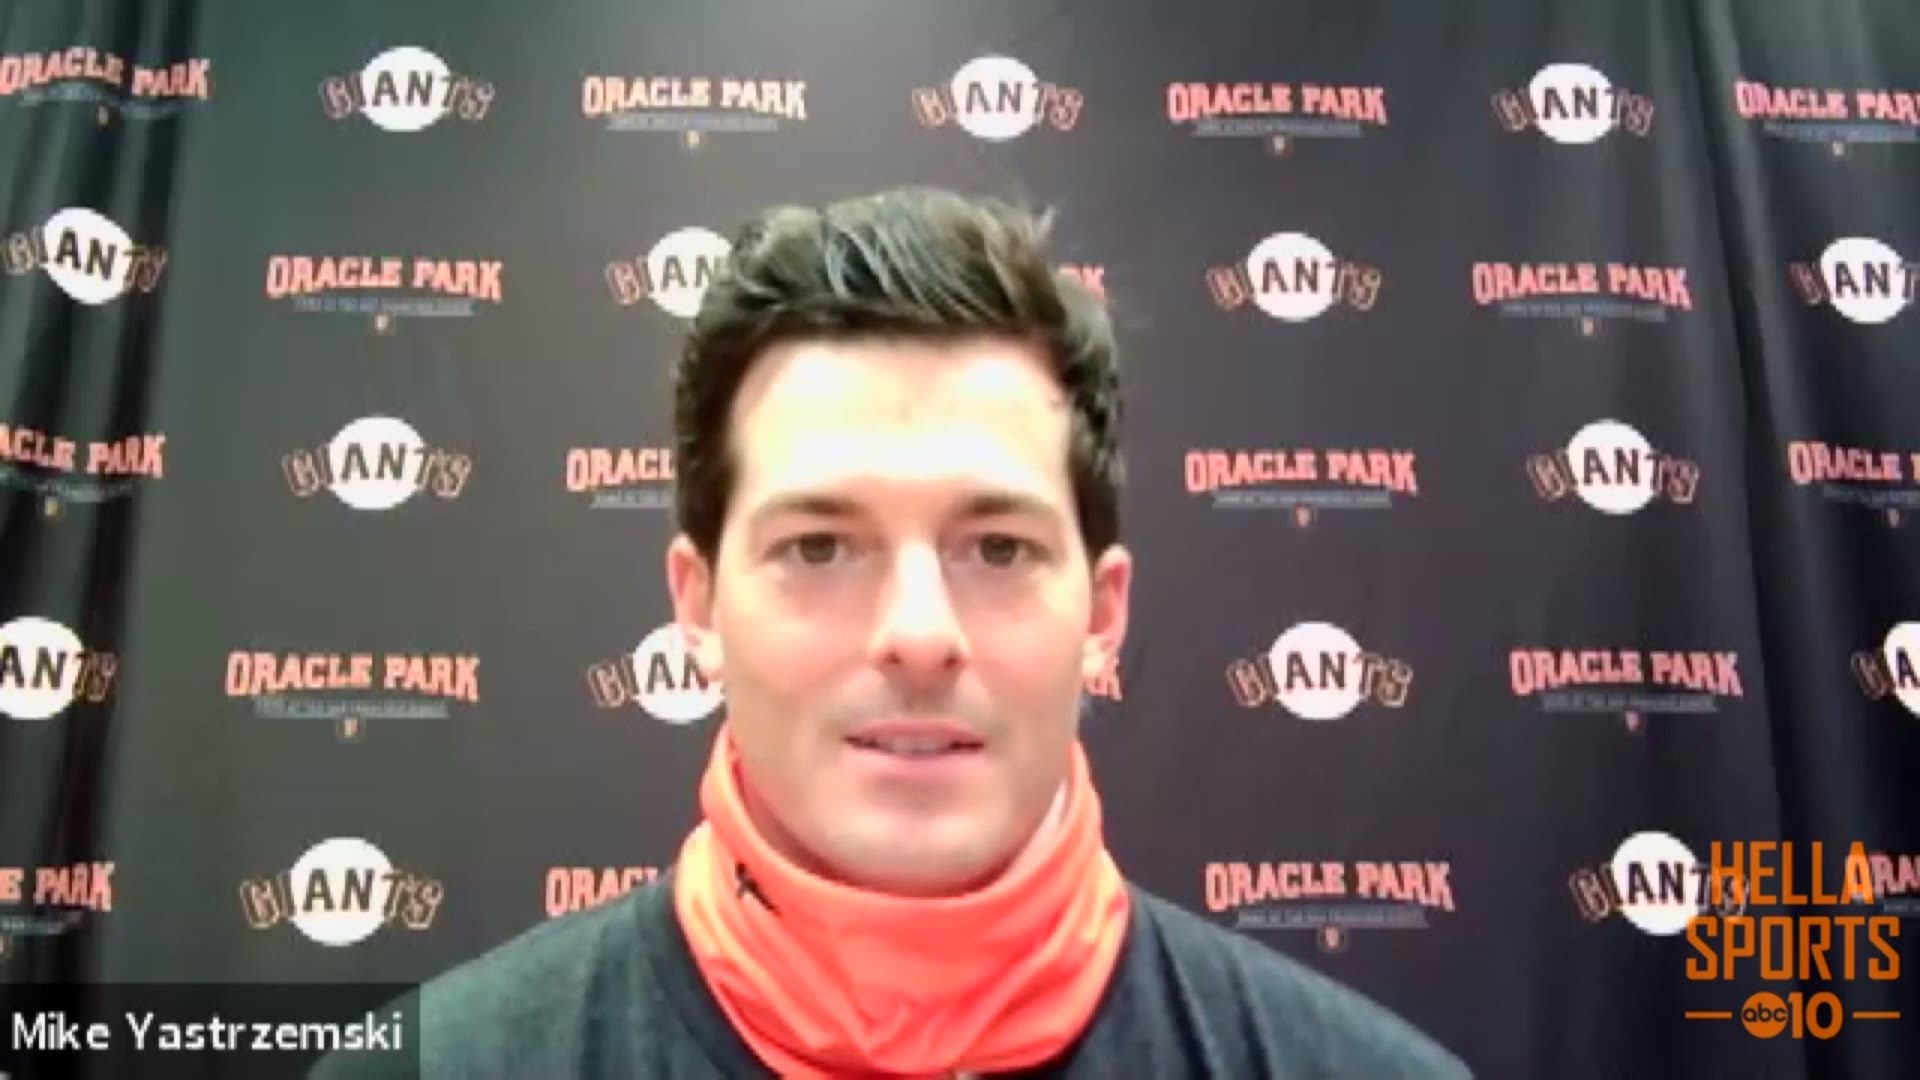 Mike Yastrzemski talks about experiencing his second career walk-off homer to lift his San Francisco Giants over the San Diego Padres on Wednesday night.